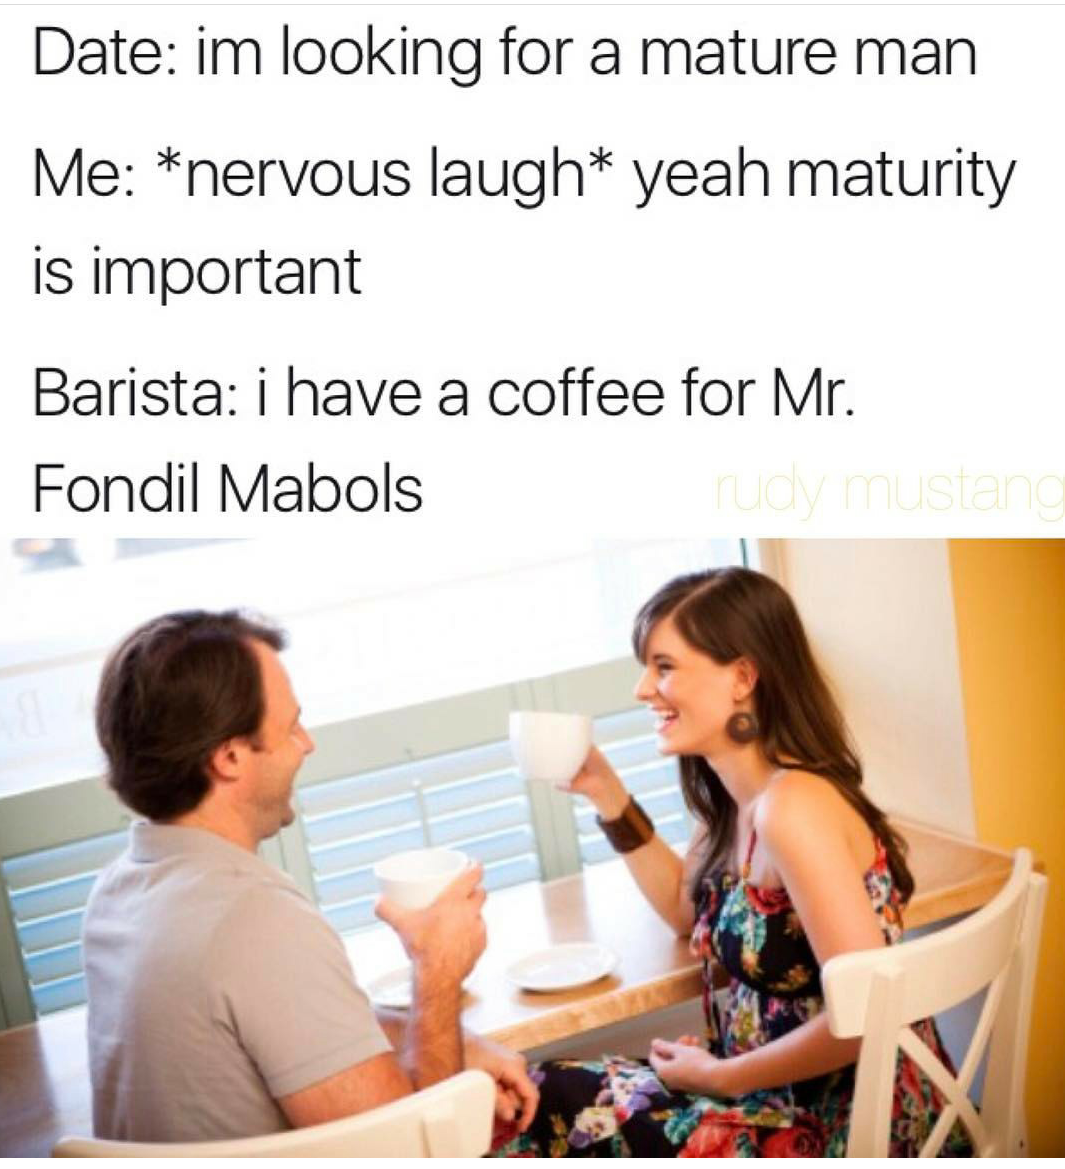 memes - good places to go on a date - Date im looking for a mature man Me nervous laugh yeah maturity is important Barista i have a coffee for Mr. Fondil Mabols